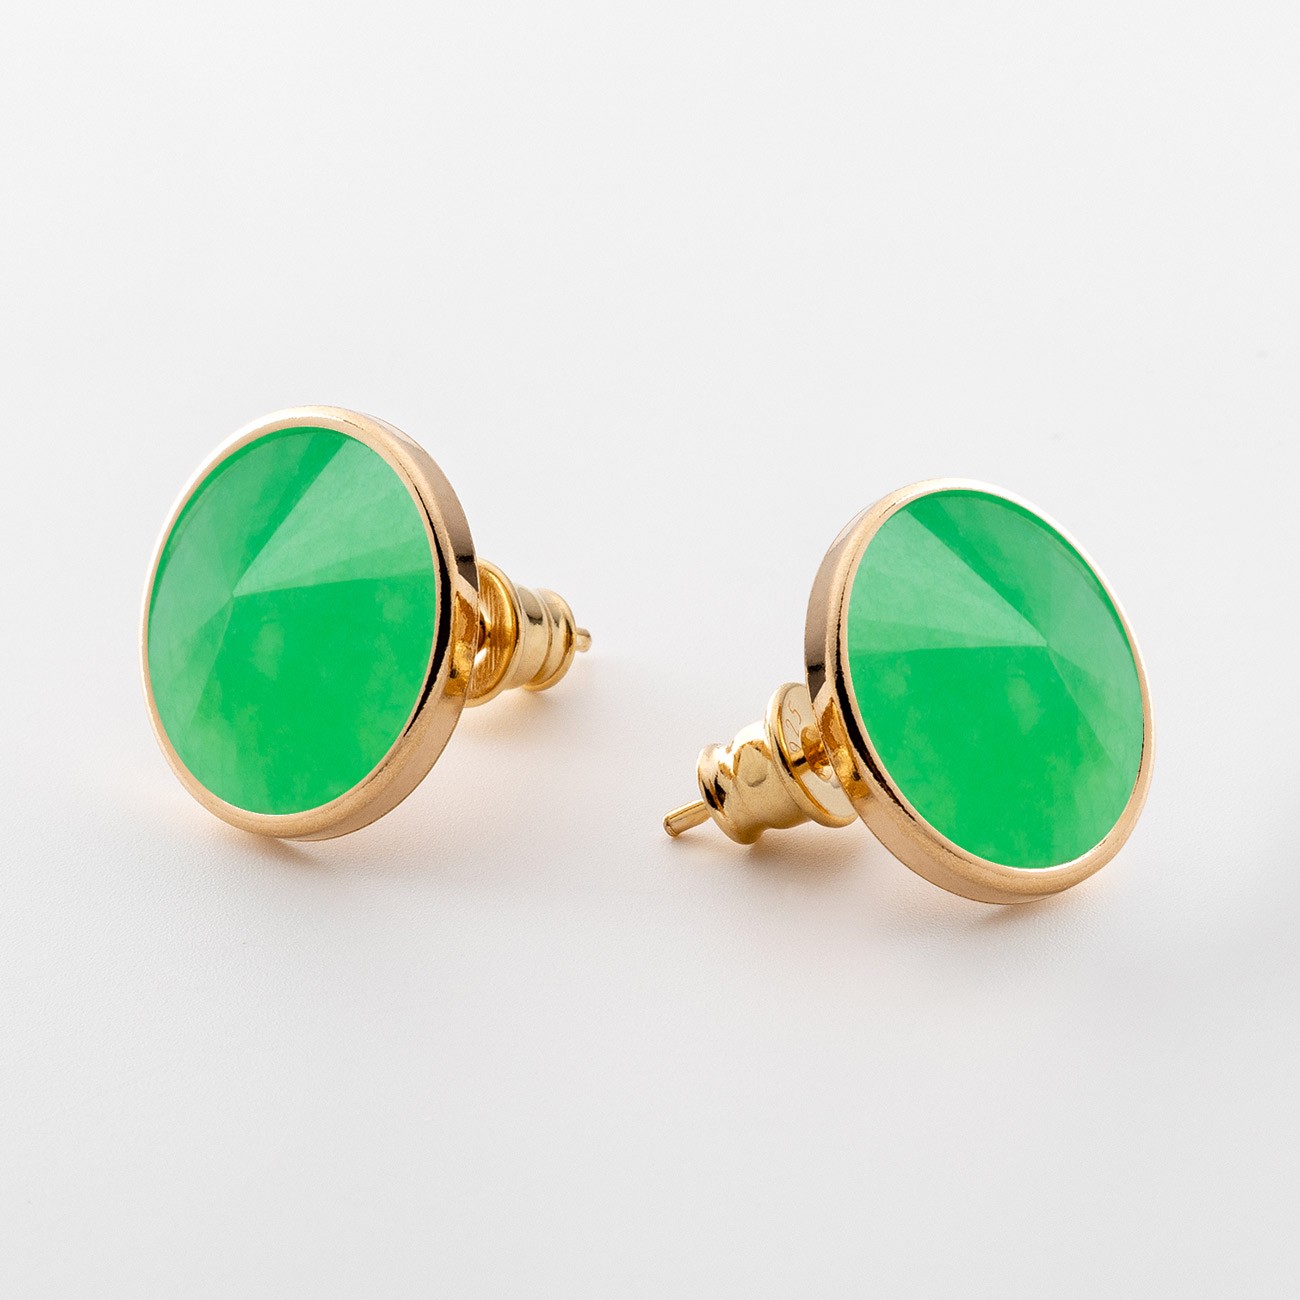 Earrings with round natural stone chrysoprase, 925